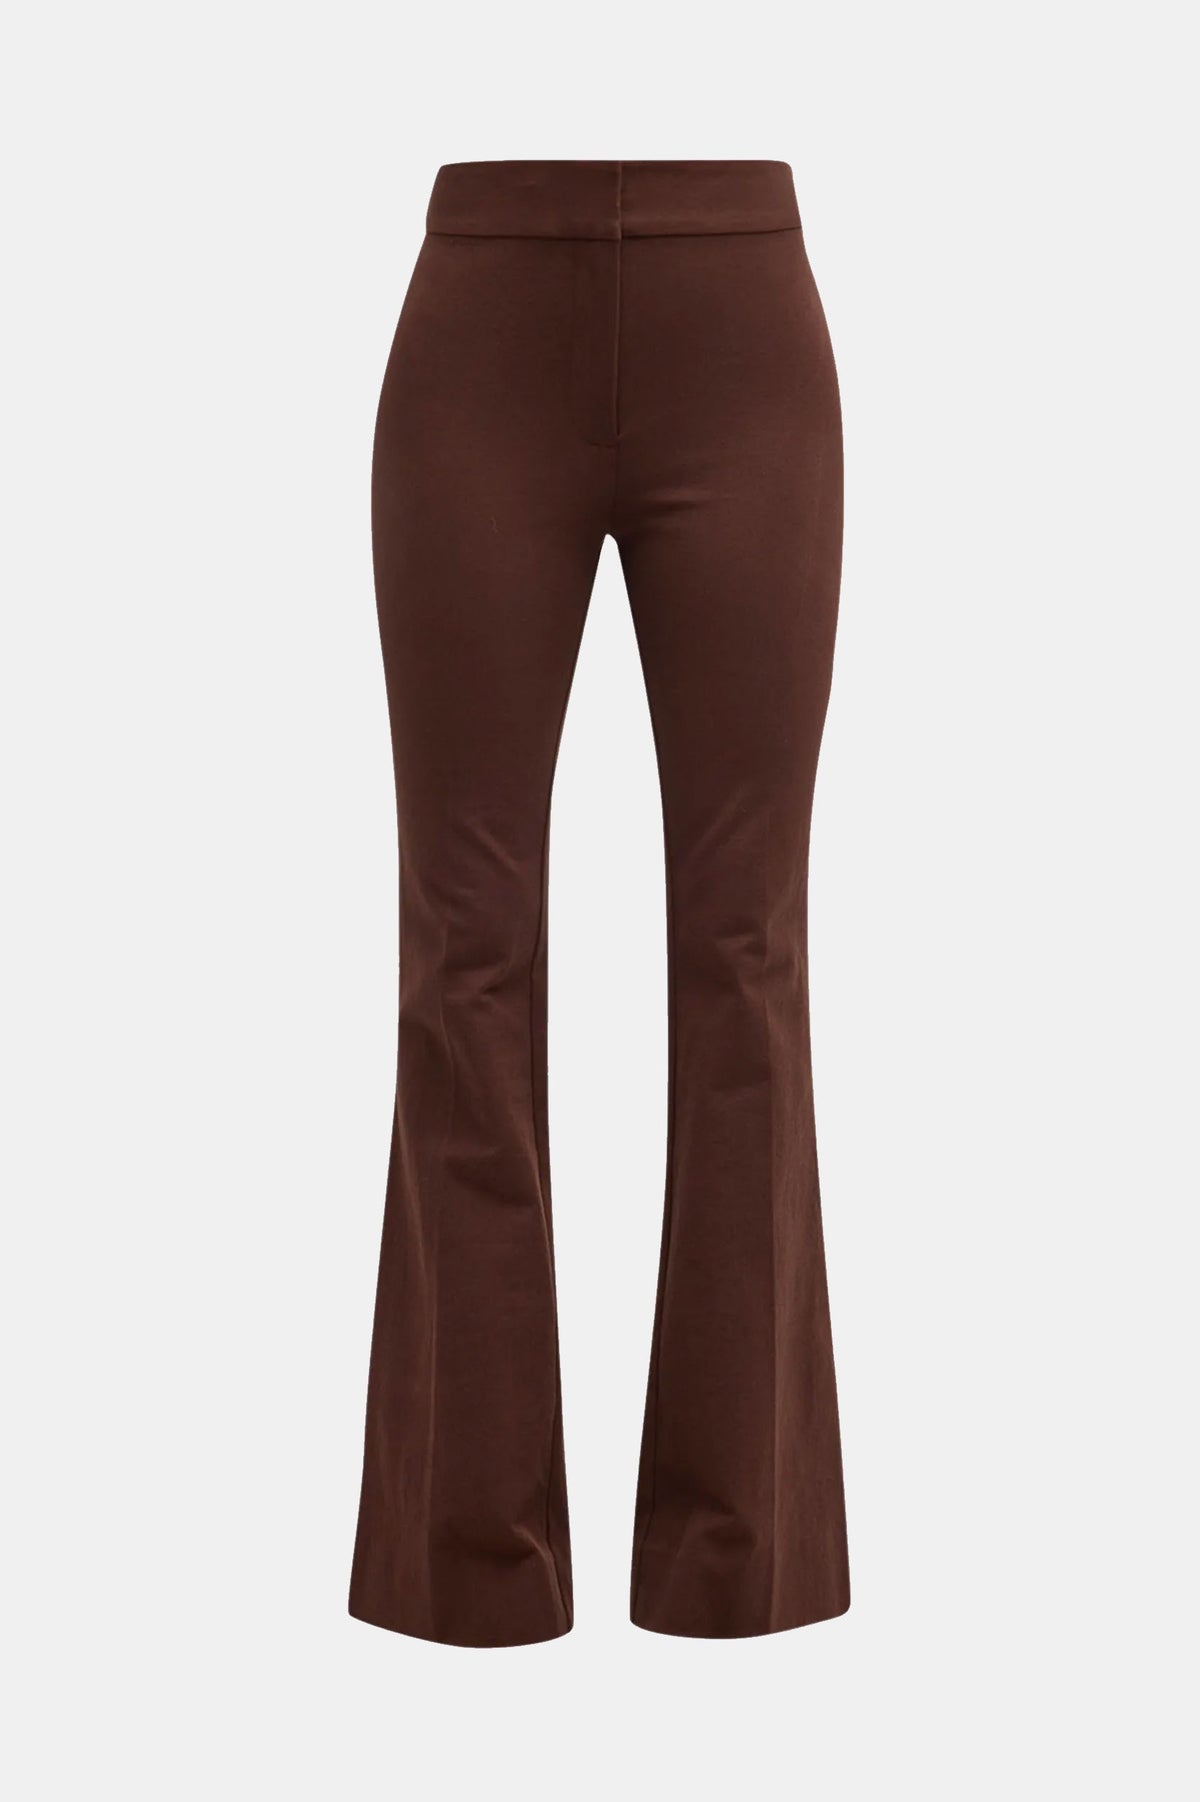 Crosby Flare Trouser in Chocolate